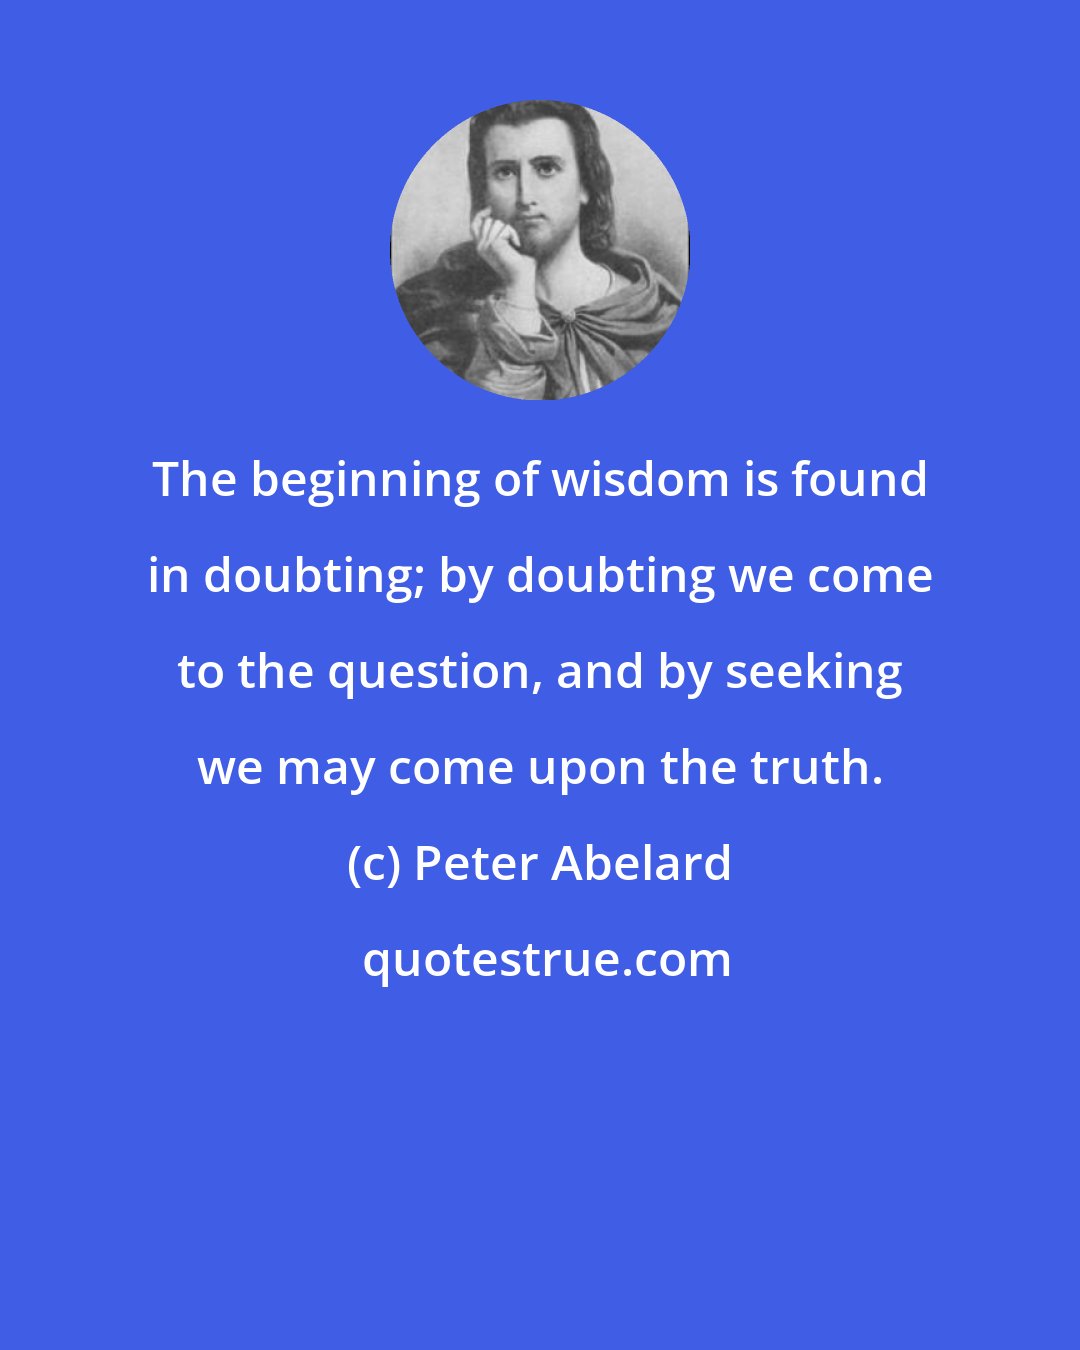 Peter Abelard: The beginning of wisdom is found in doubting; by doubting we come to the question, and by seeking we may come upon the truth.